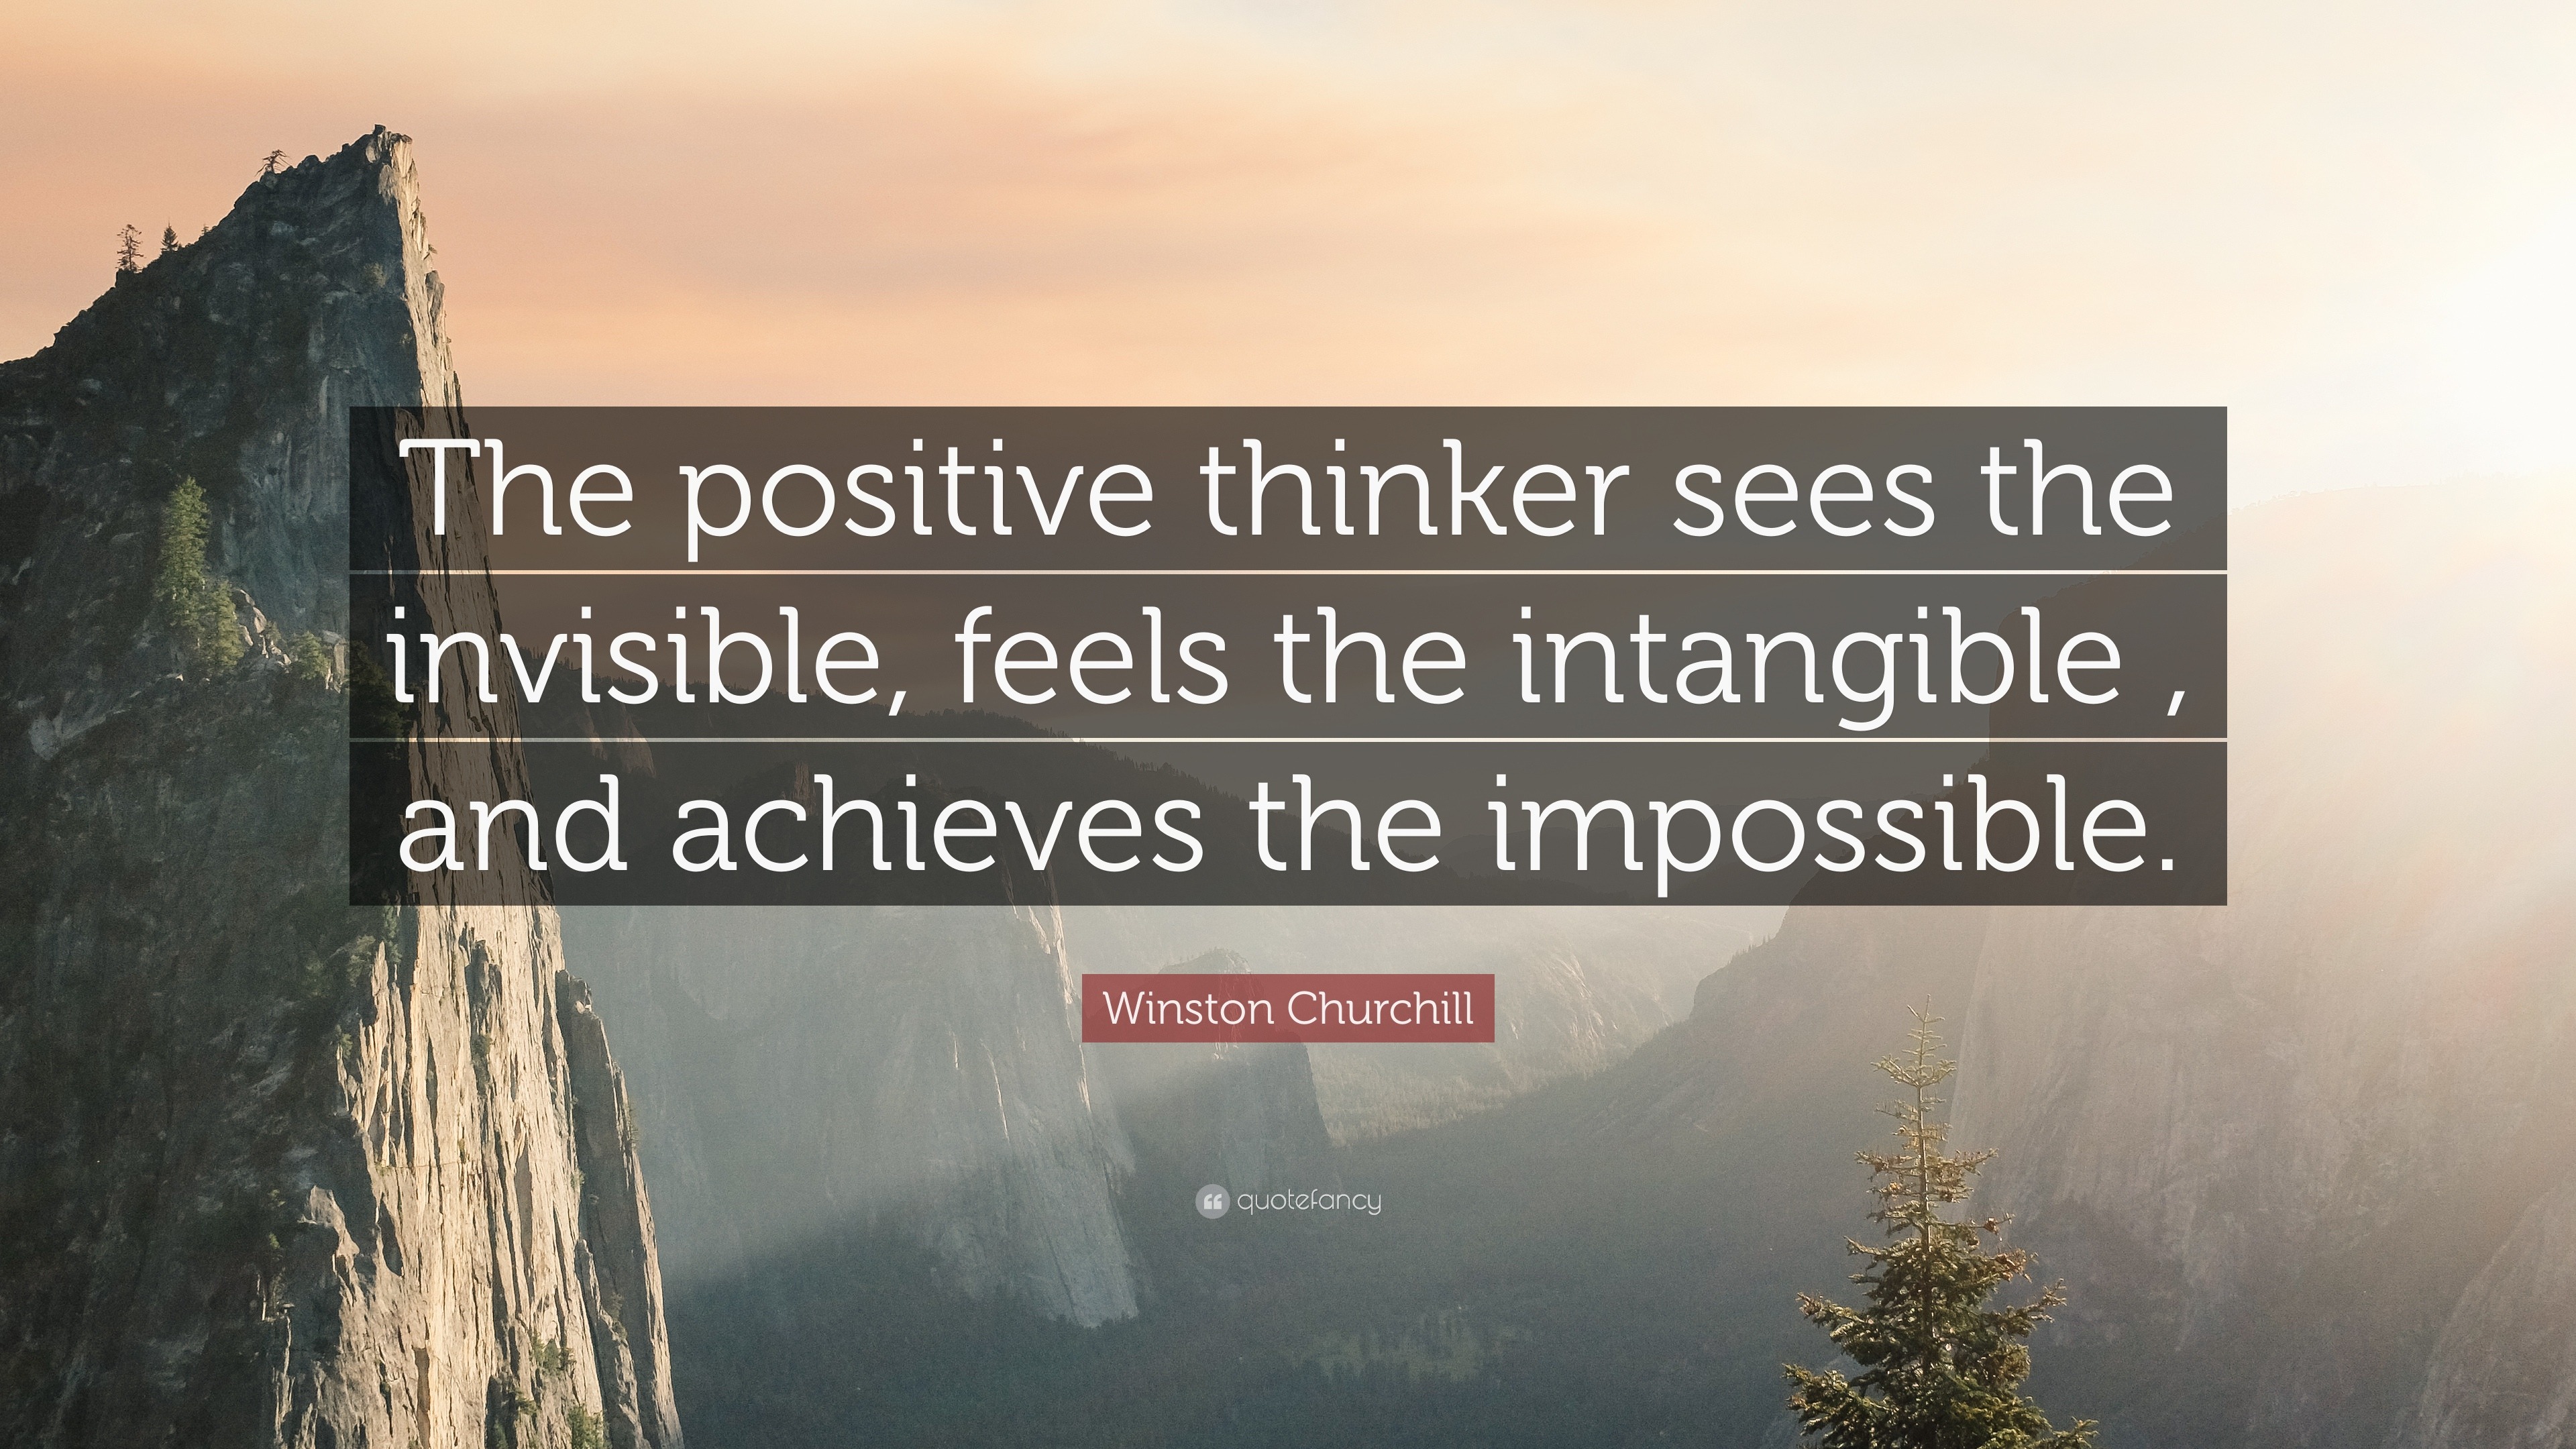 Winston Churchill Quote: “The positive thinker sees the invisible